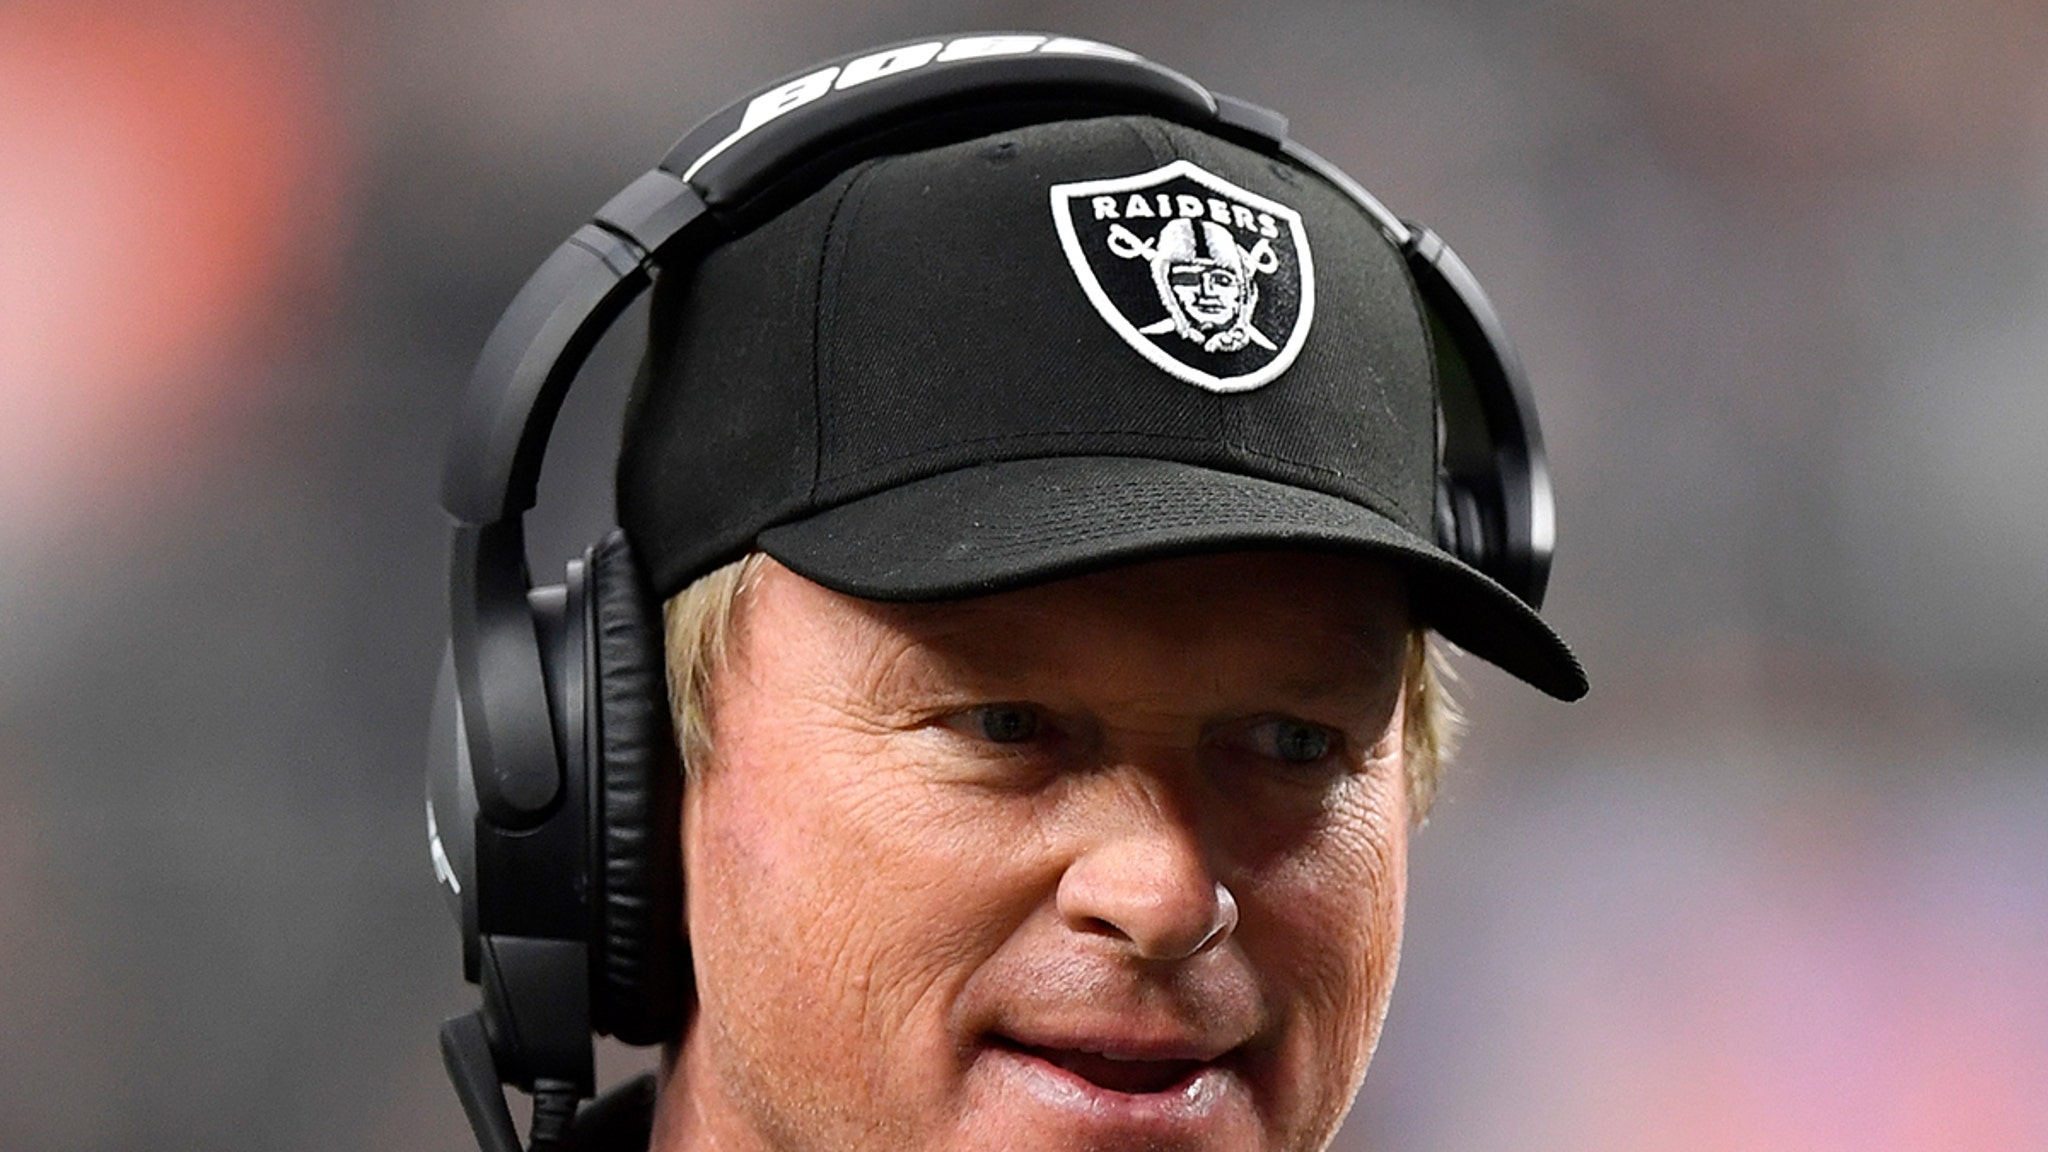 Jon Gruden Apologizes For Racist Language In 2011 Email, NFL Investigating thumbnail